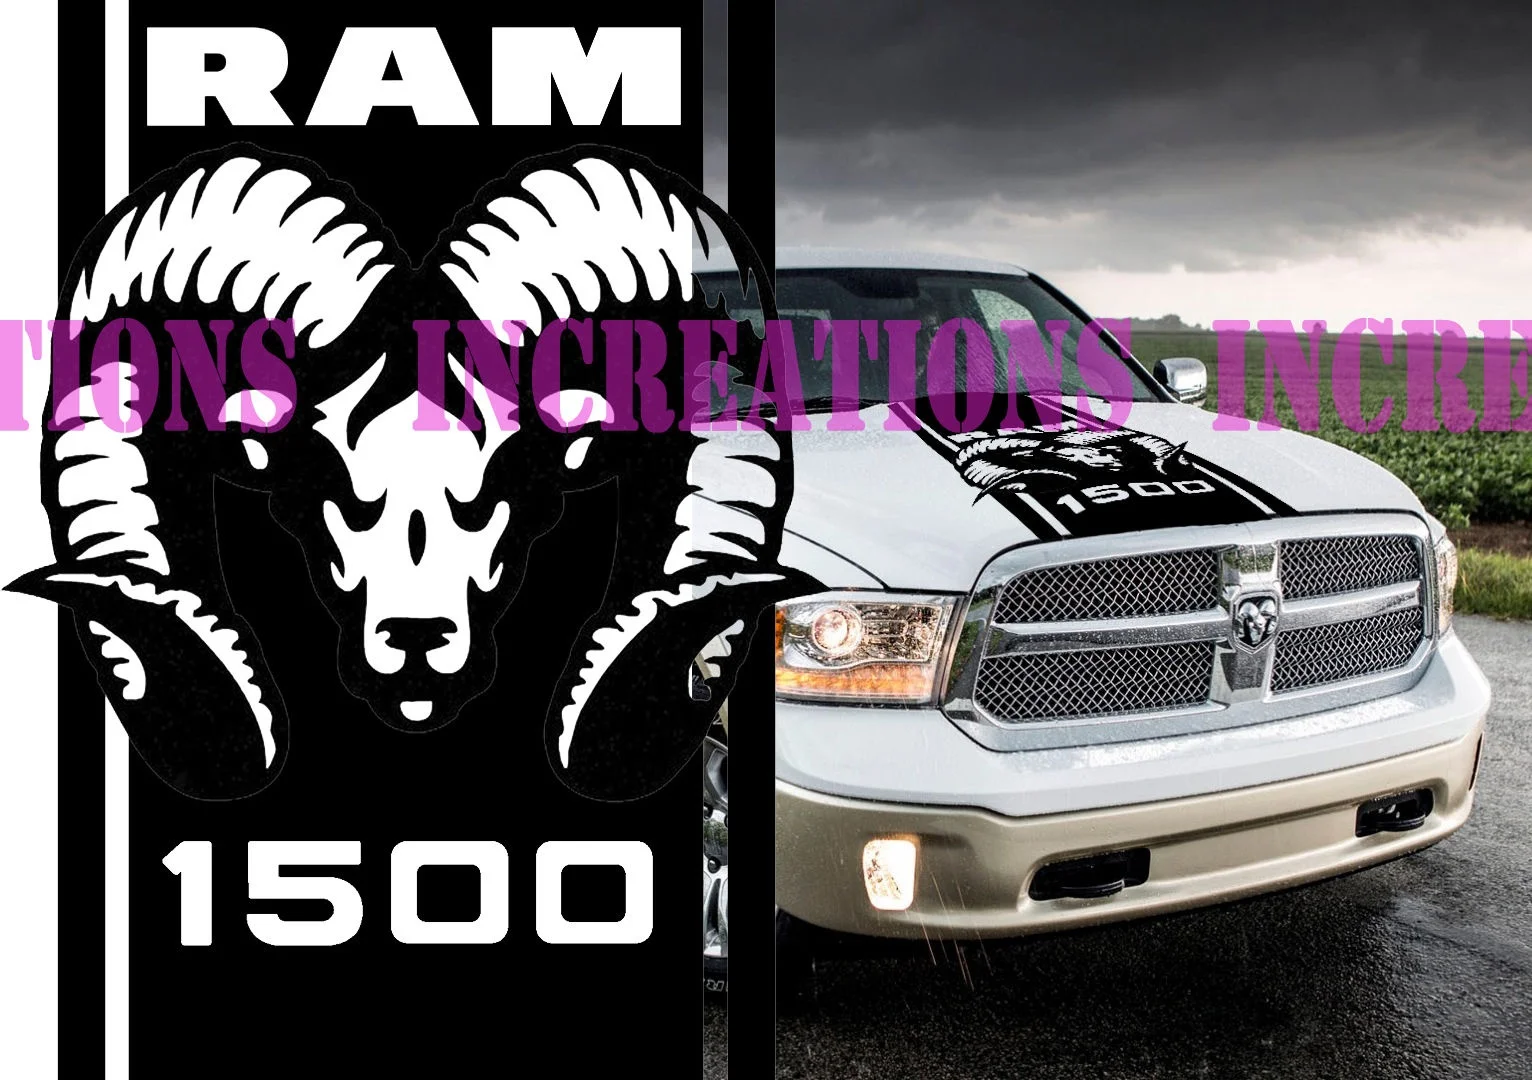 Hood Stripes -Text Available On Decal  Graphic Sticker is Universal Fit Dodge Truck Chev GMC Ram Jeep Car Ford |Toyota